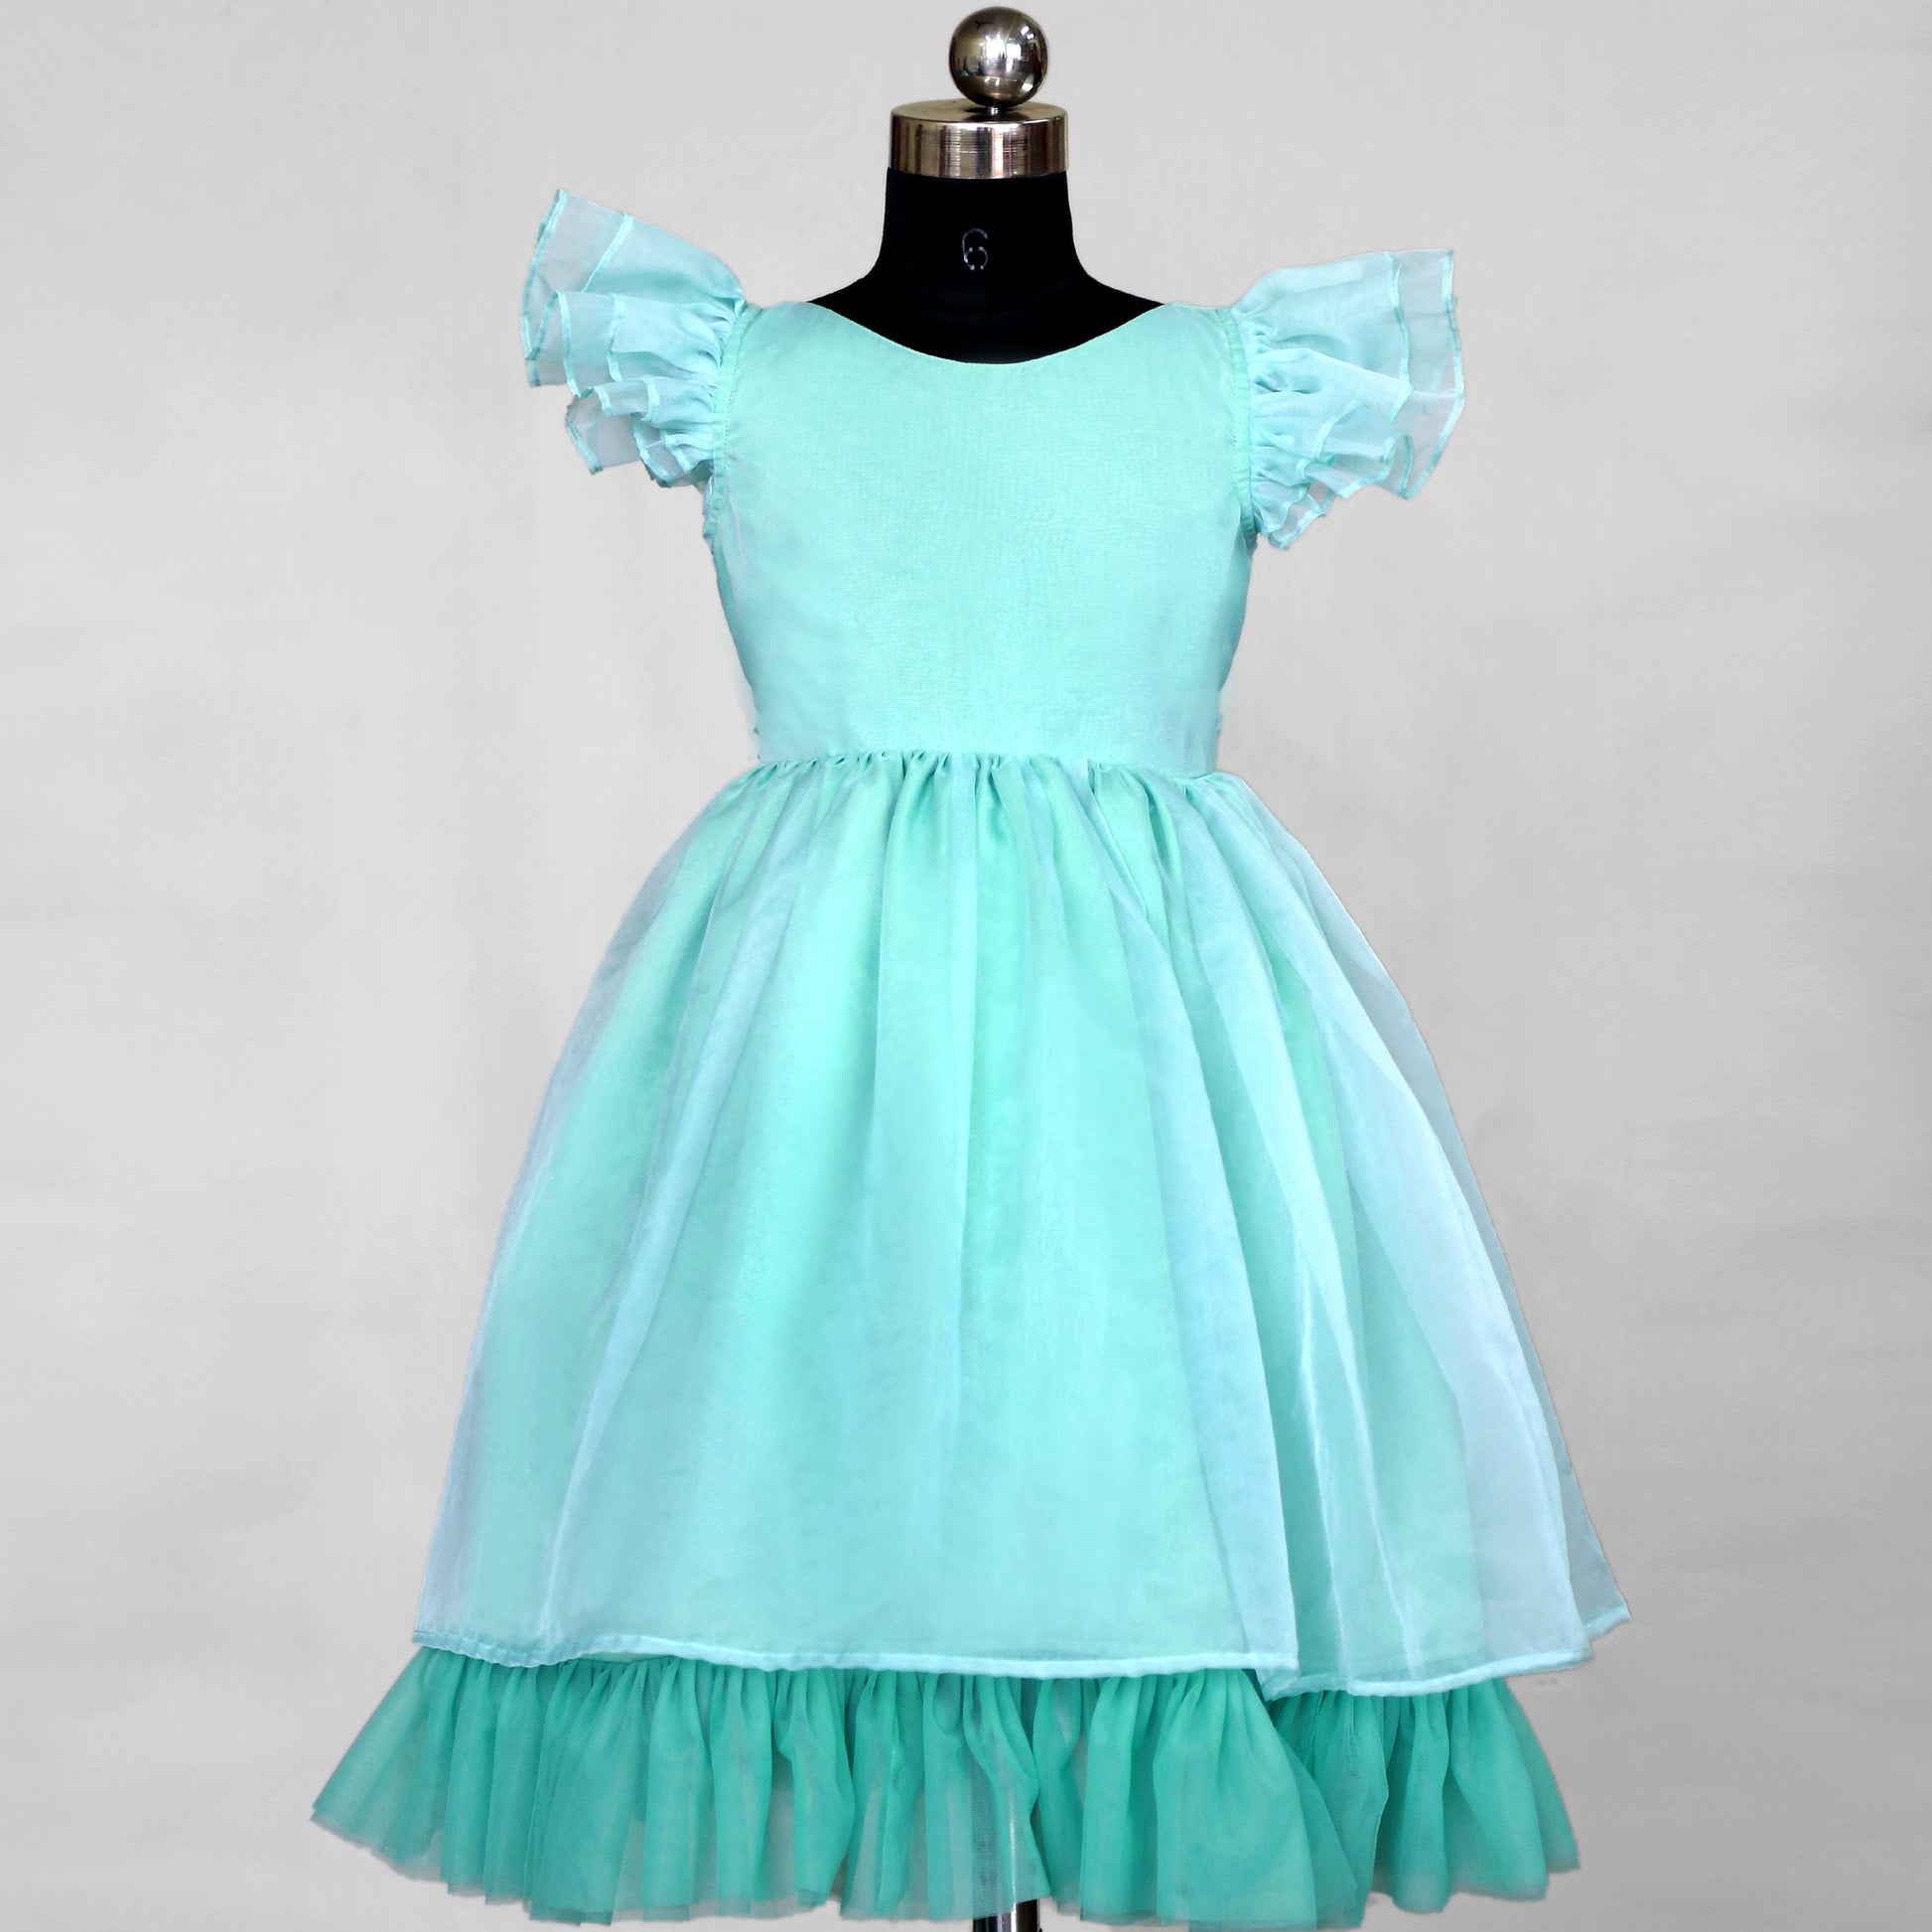 New party wear dresses for kids designer dress online indo western party wear for girl  7 year olds birthday frocks childrens party wear dress peach organza tissue birthday outfit at heykidoo 